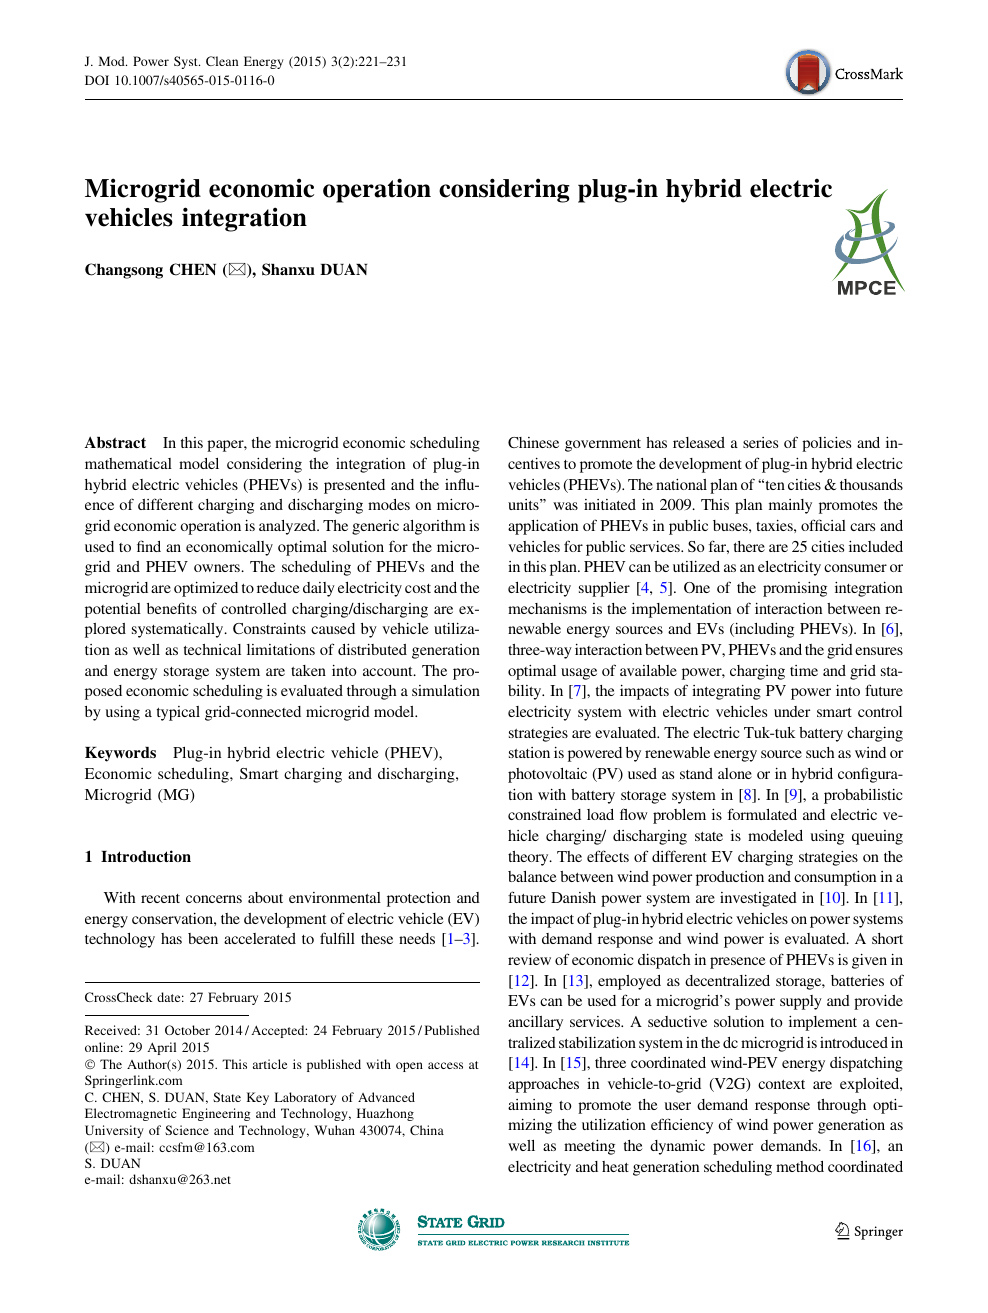 Microgrid Economic Operation Considering Plug In Hybrid Electric Vehicles Integration Topic Of Research Paper In Electrical Engineering Electronic Engineering Information Engineering Download Scholarly Article Pdf And Read For Free On Cyberleninka